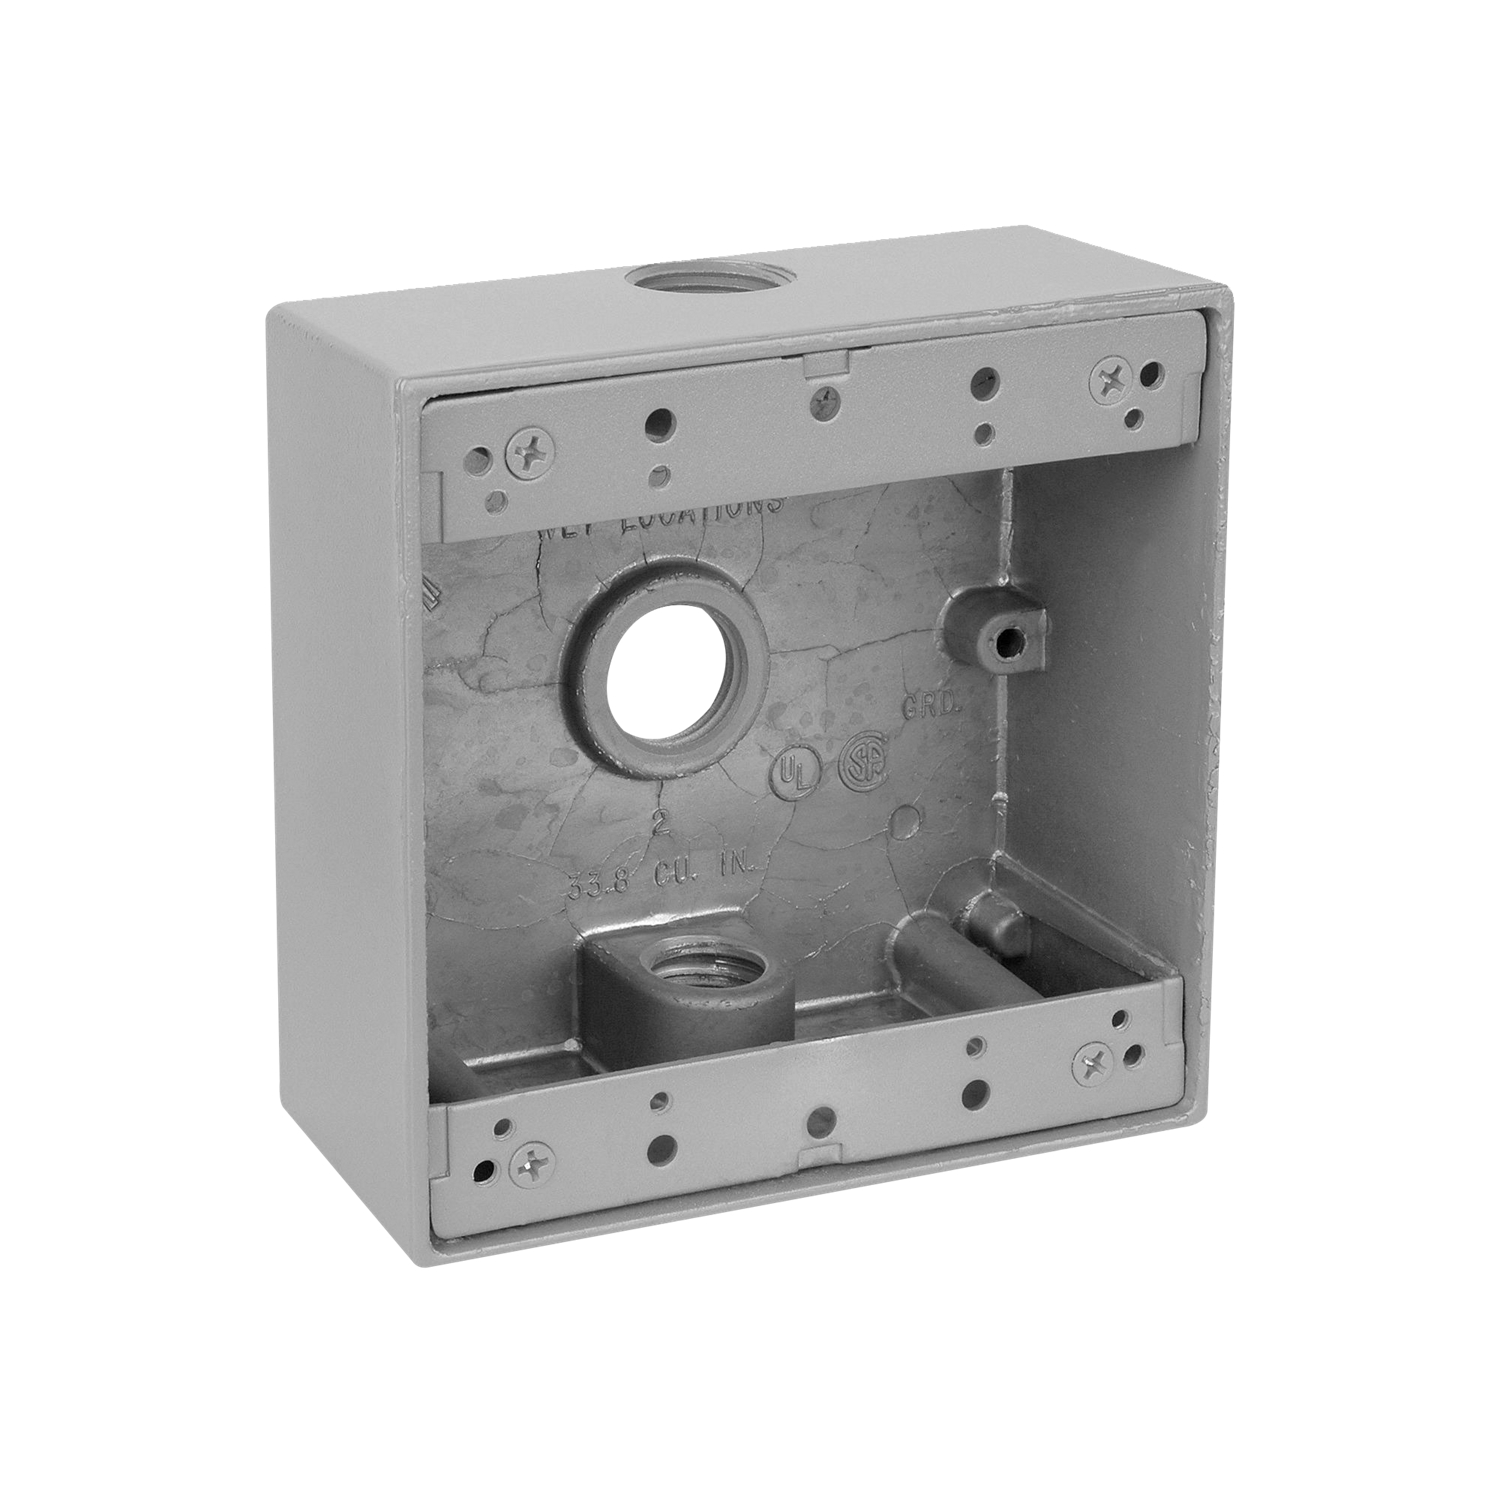 2IH3-1 Weatherproof Outlet Box Red Dot;ABB - Installation Products